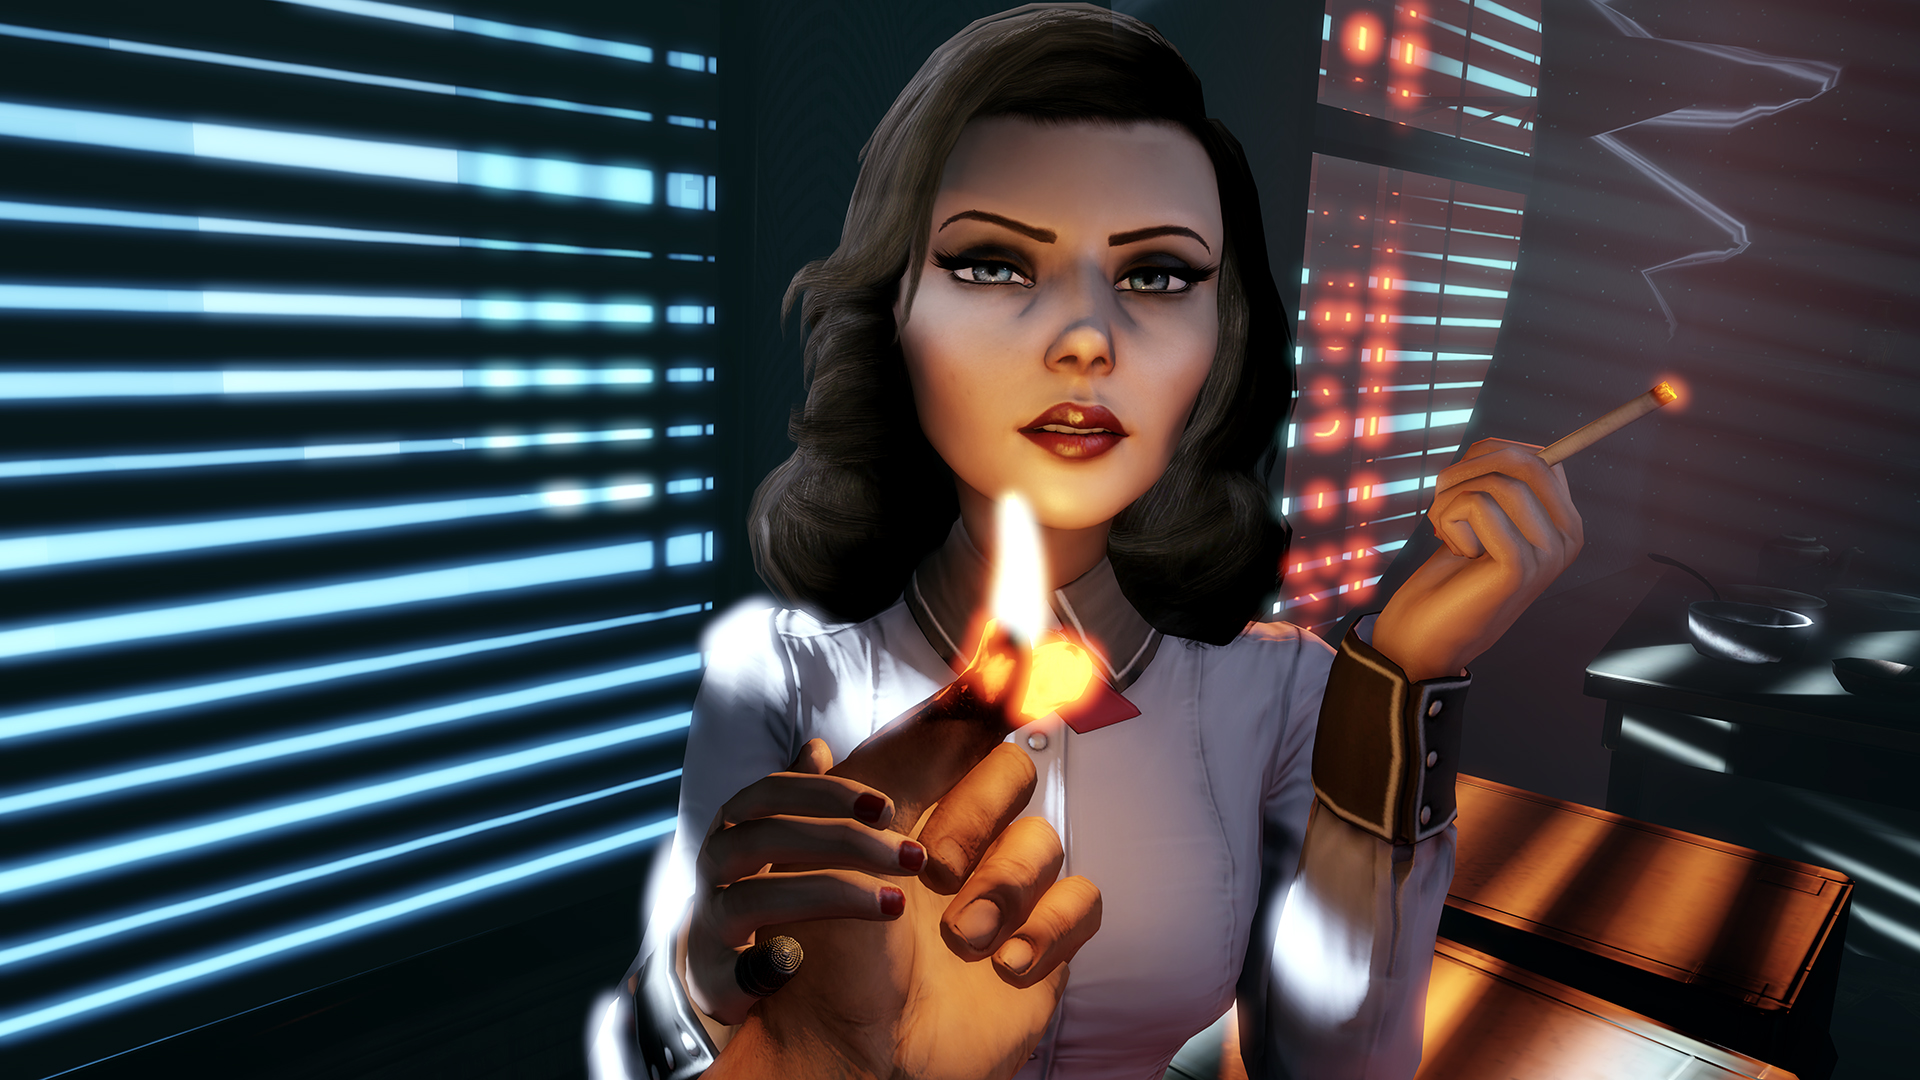 bioshock-infinite-burial-at-sea-episodes-1-2-review-otaku-dome-the-latest-news-in-anime